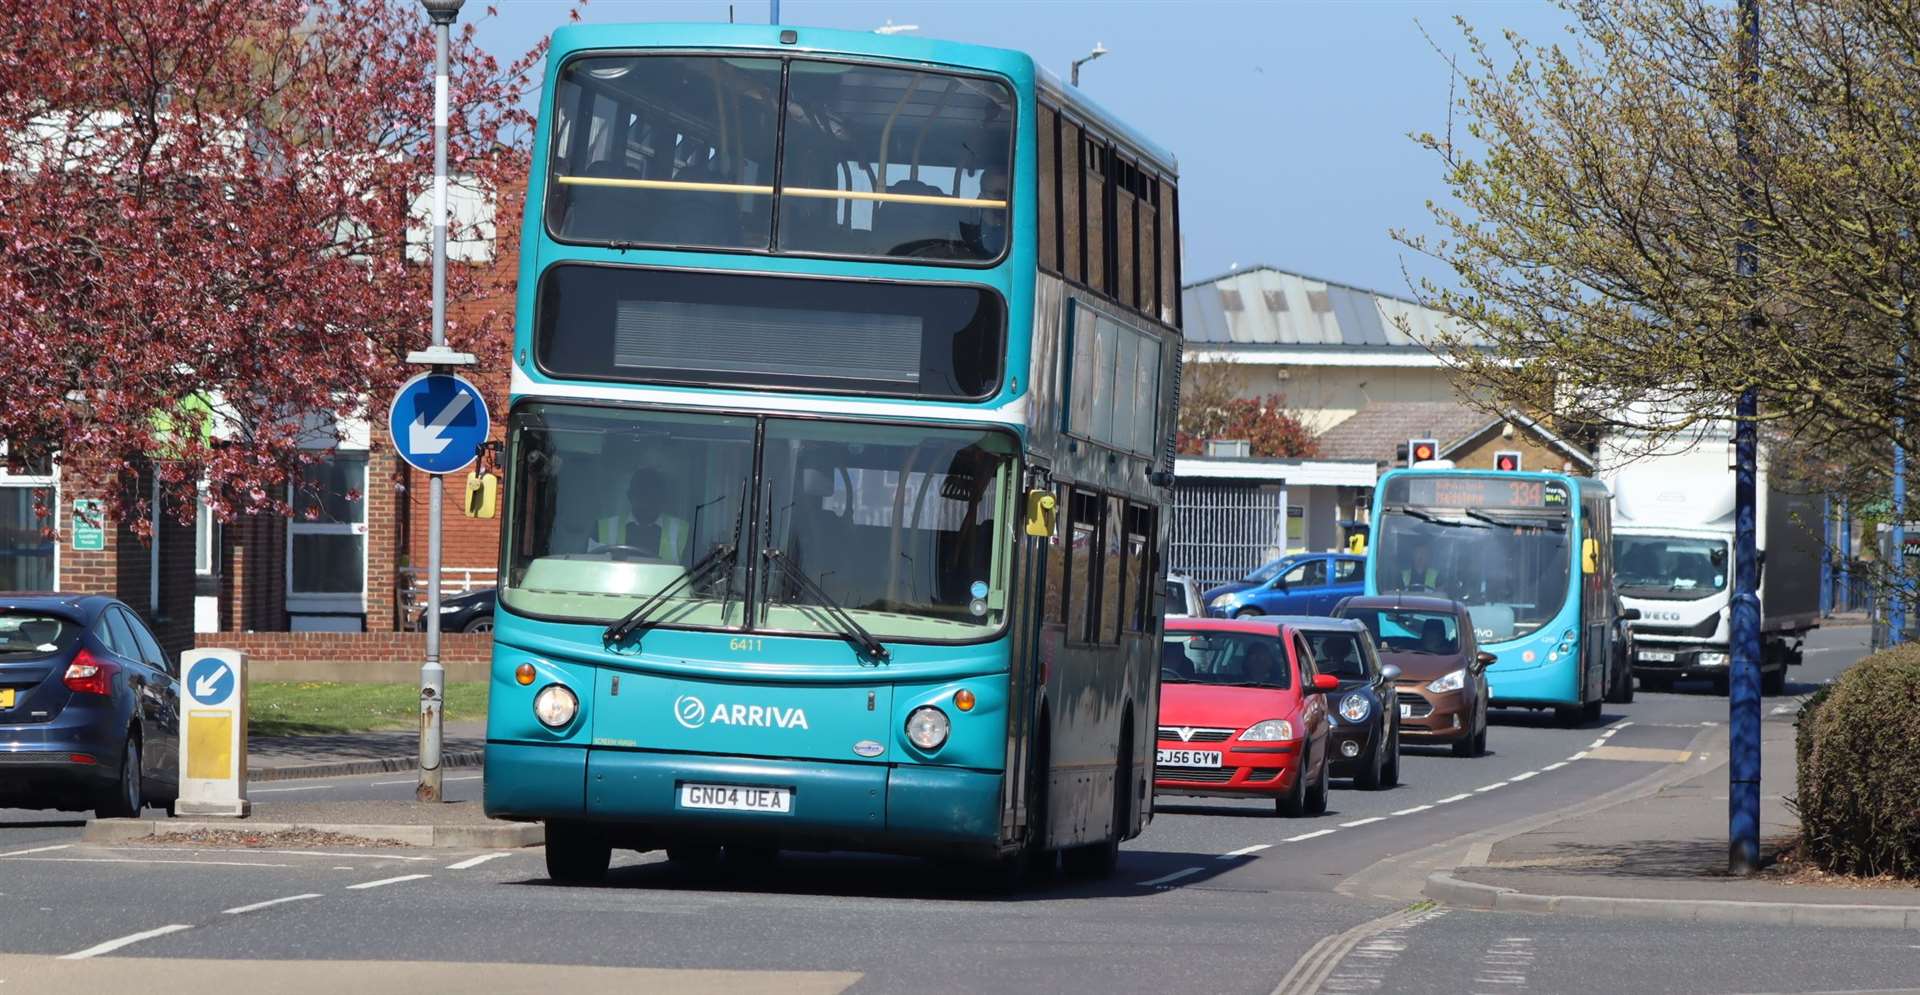 Arriva buses in Millennium Way, Sheerness